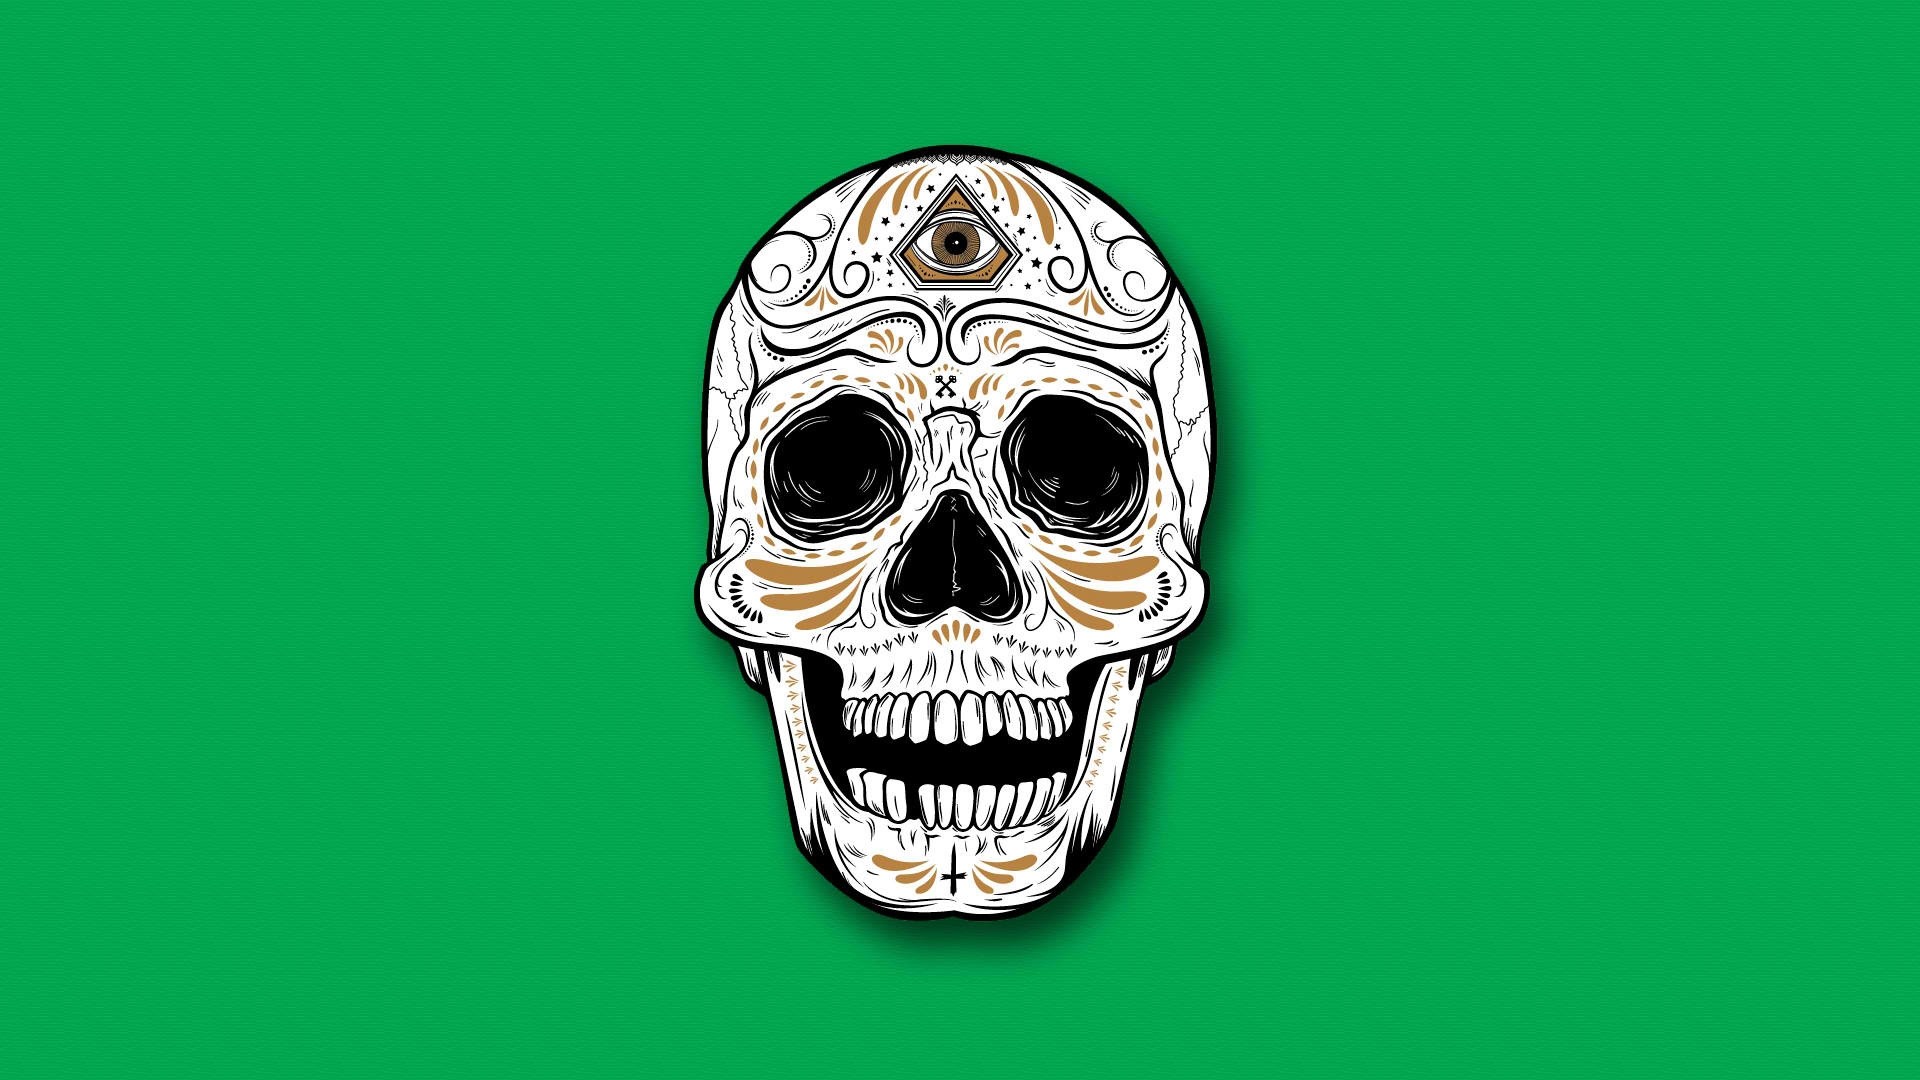 1920x1080 Gallery Store Day Of The Dead Sugar Skull Wallpaper Black Gold Fkpqy